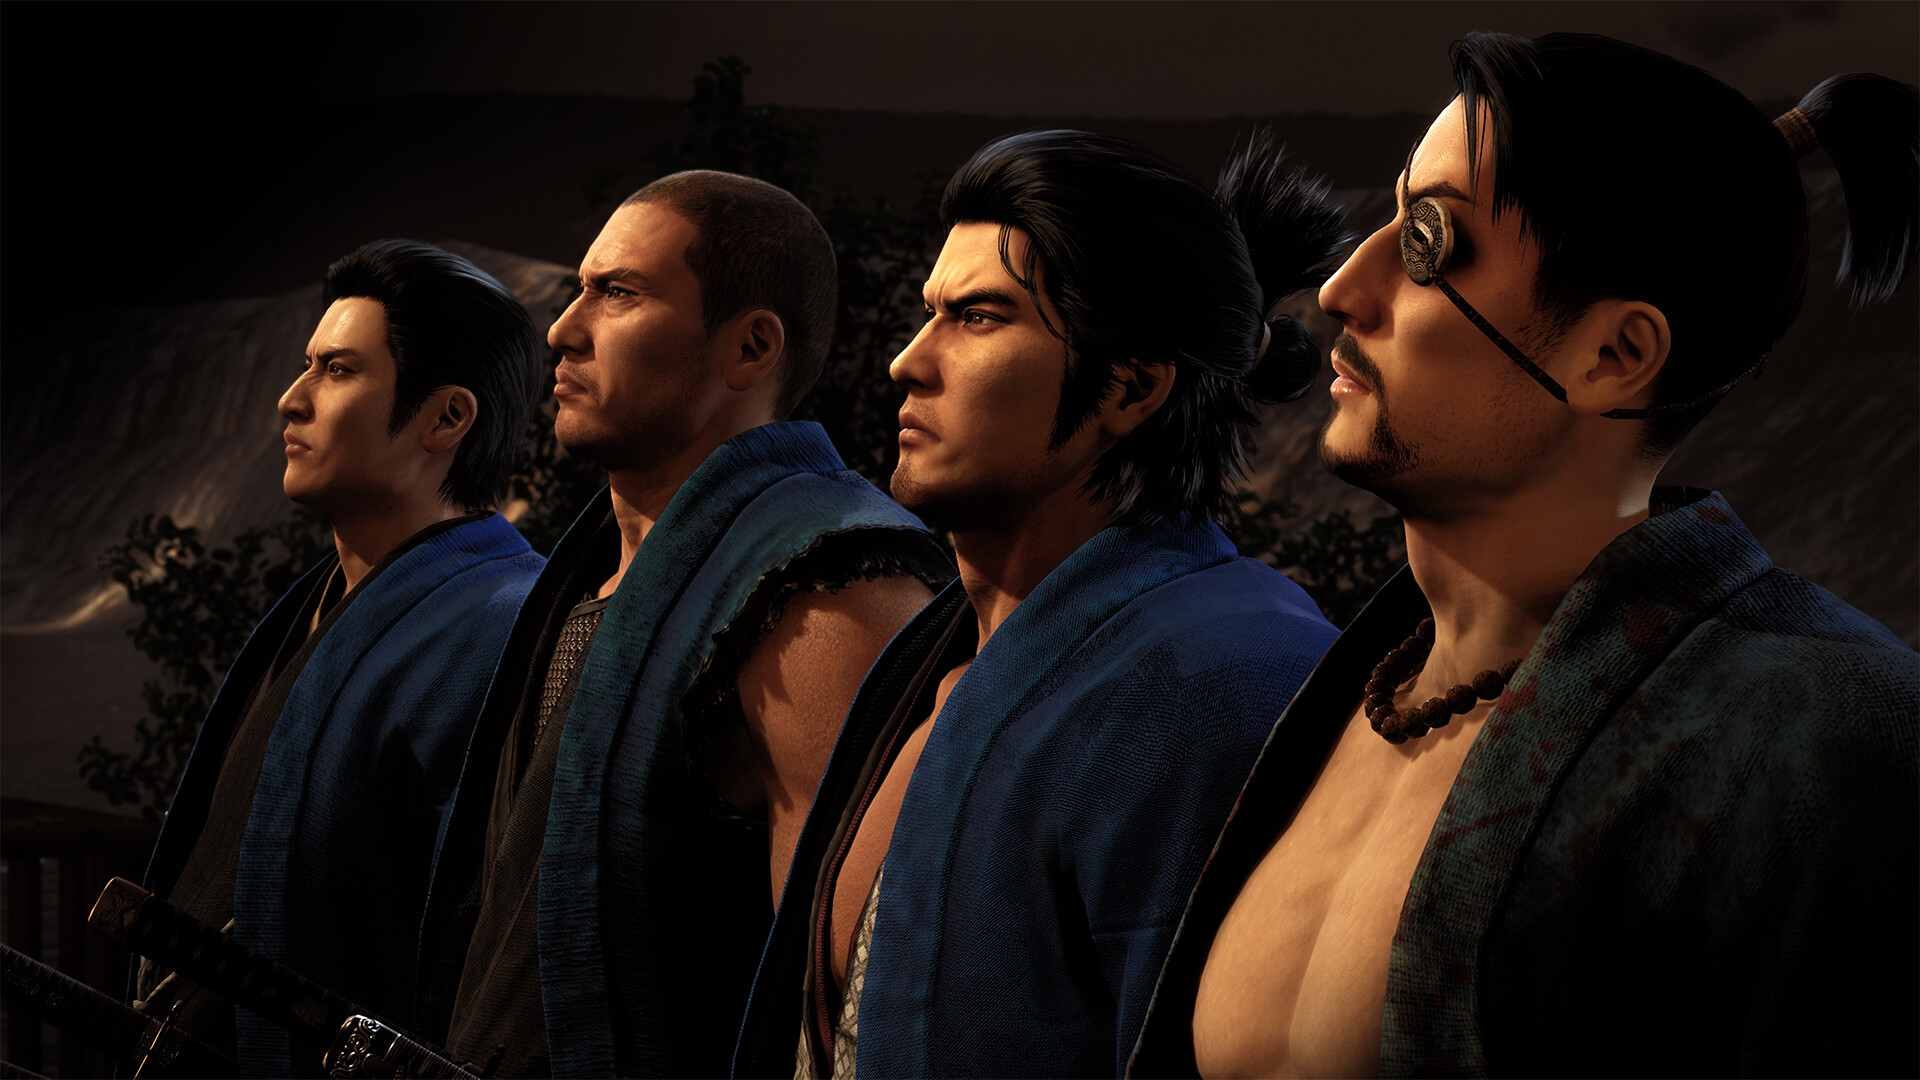 Samurai versions of classic Yakuza series characters standing in a row looking up and to the left of the screen.